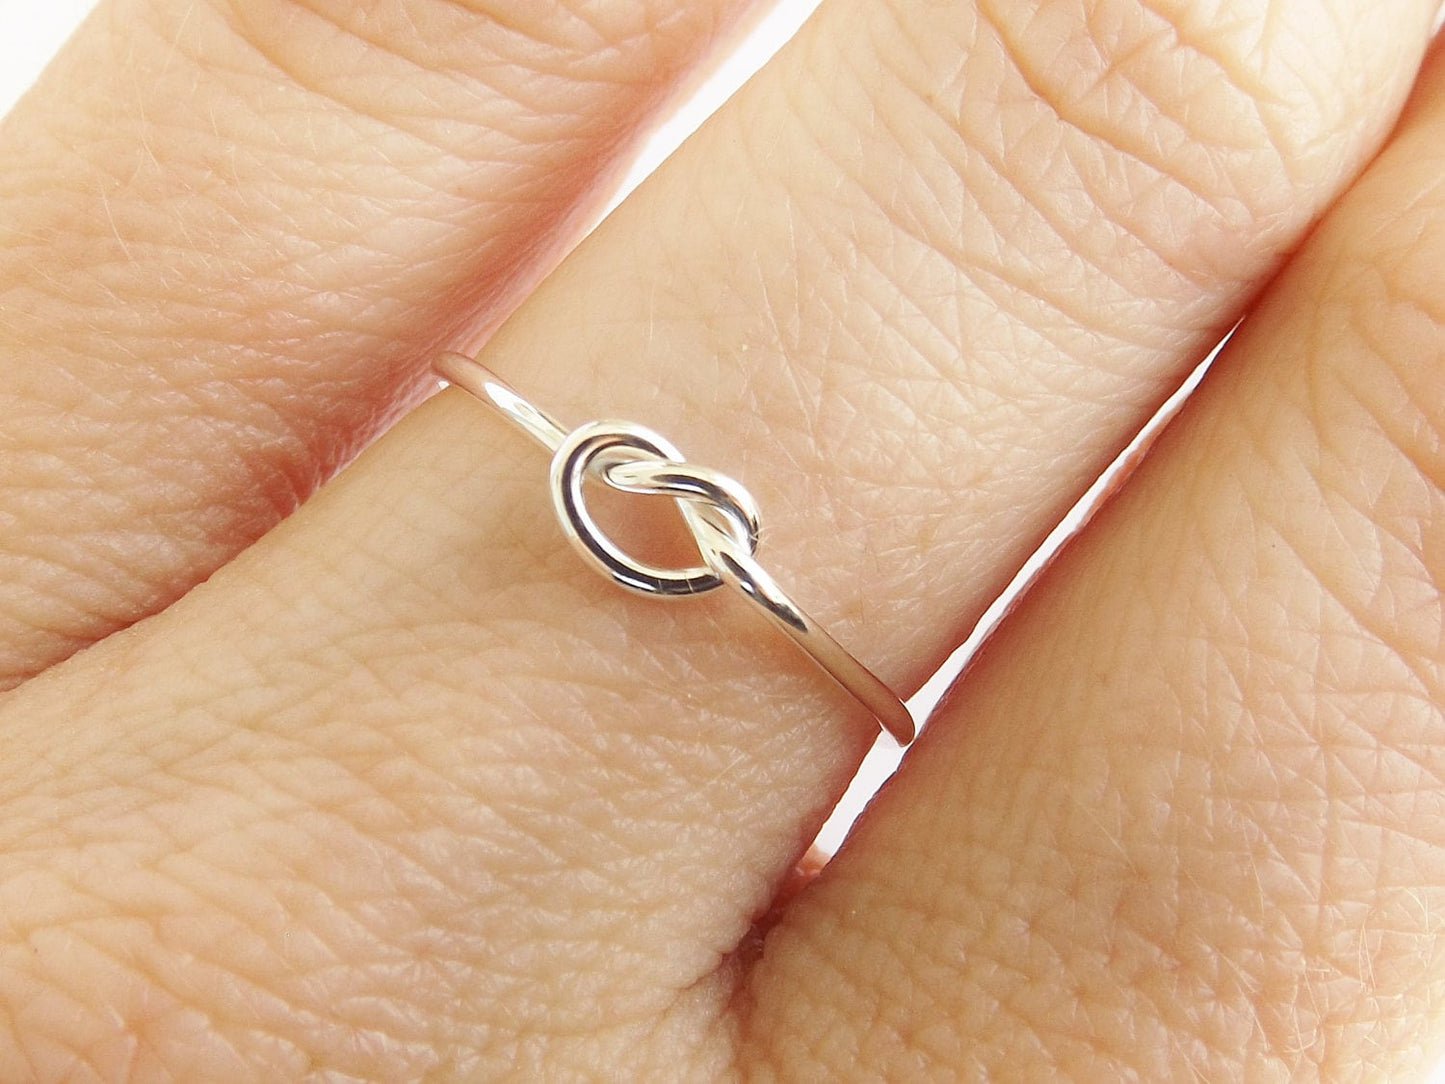 Knot Ring,Tie the Knot Ring,Eternity Ring,Forever Ring,Bridesmaids Rings,Best Friend Rings,Unique Rings,Knot,Handmade,Customizable Rings